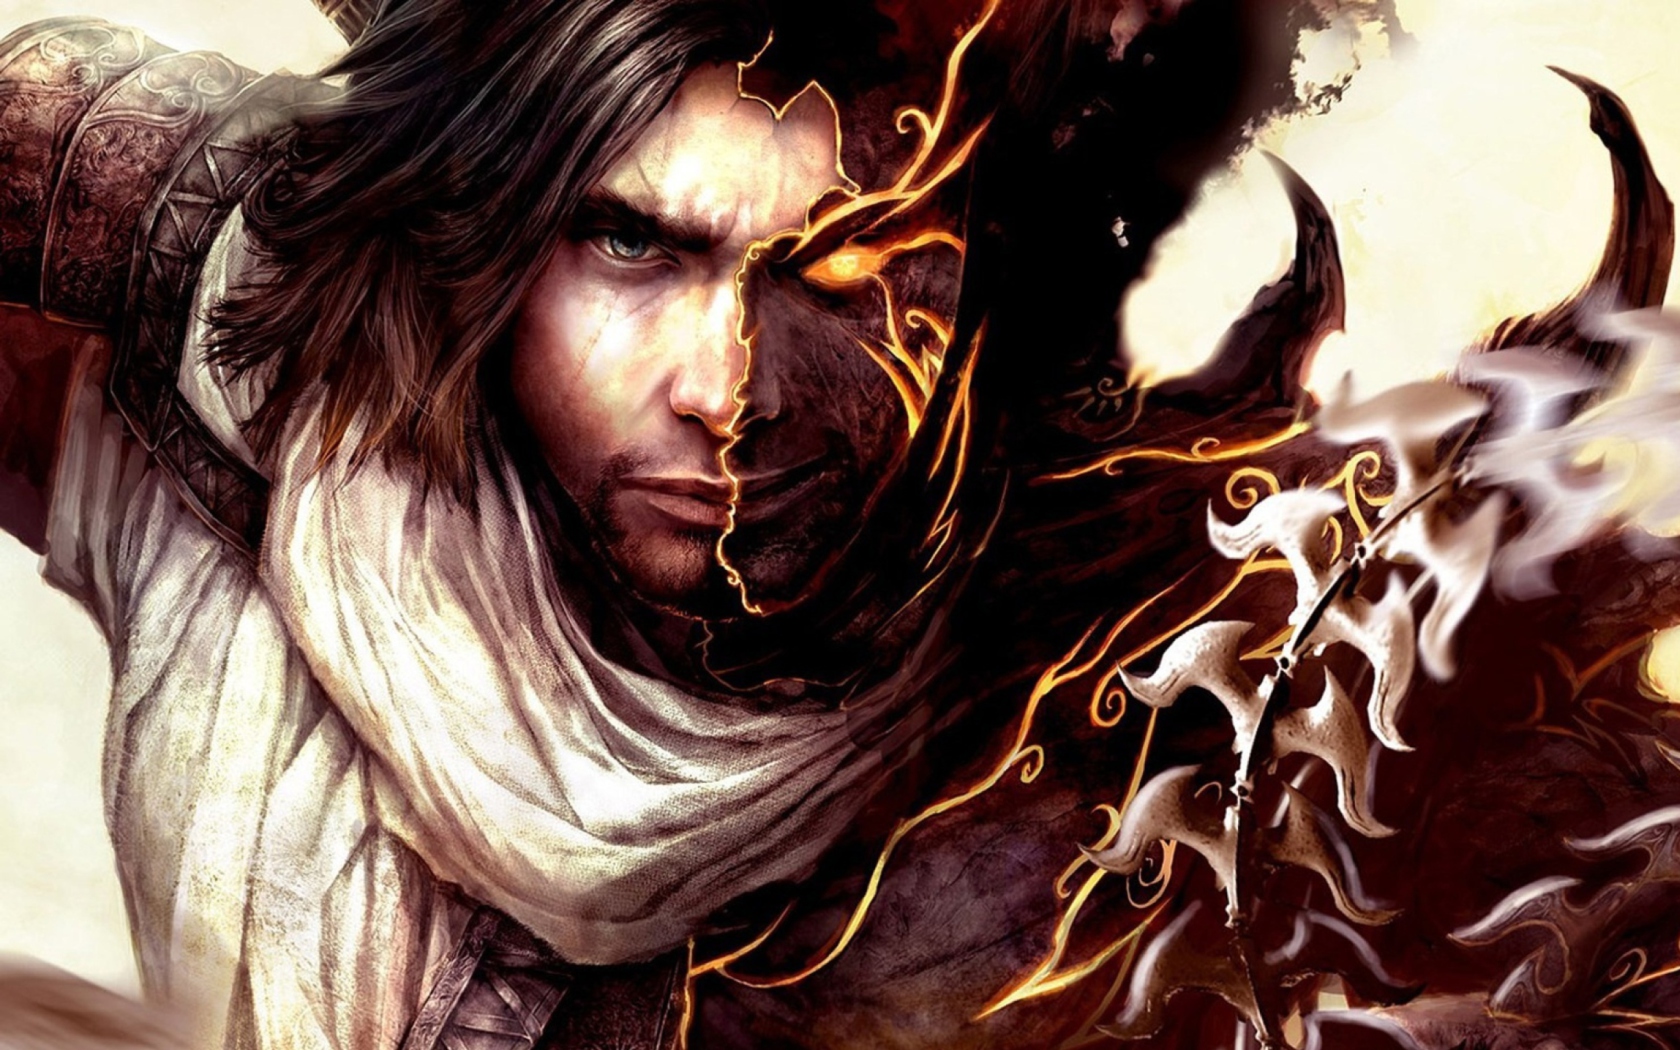 Prince Of Persia - The Two Thrones screenshot #1 1680x1050